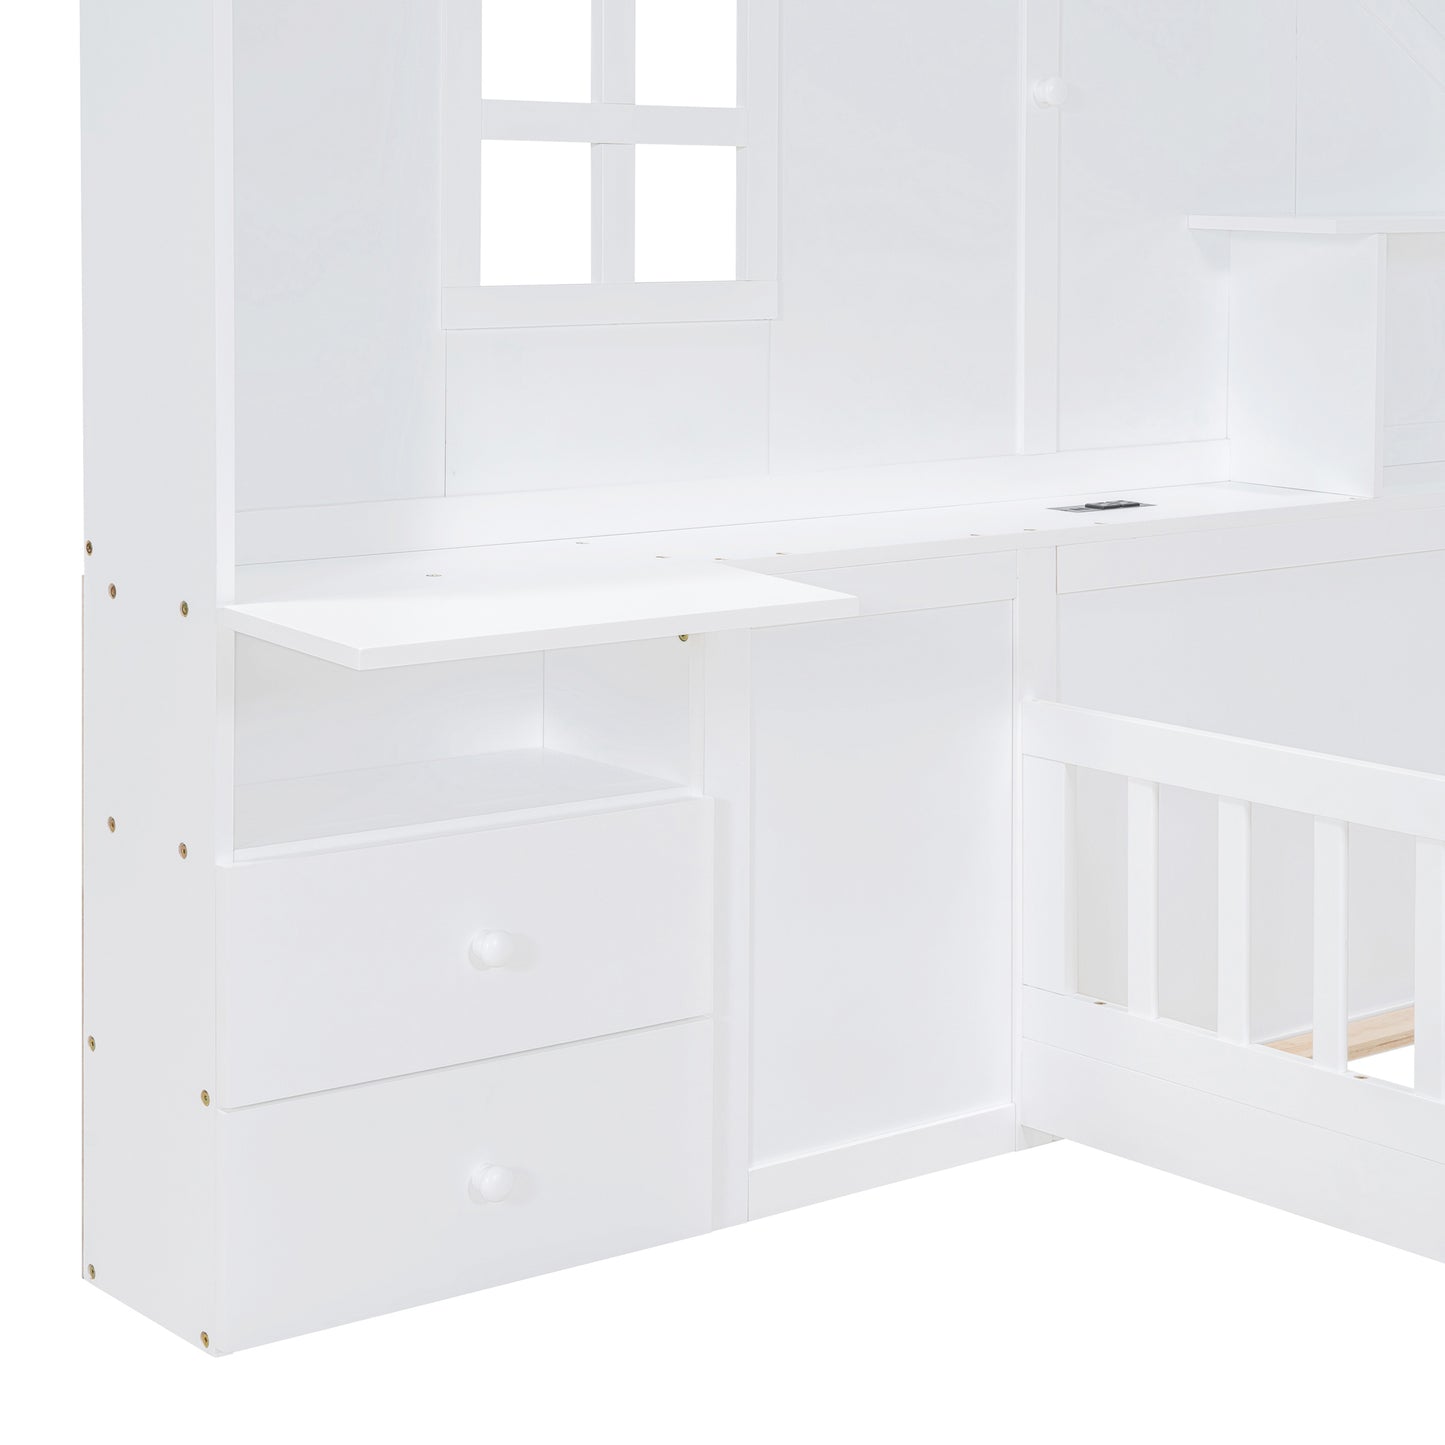 Twin Size House Bed with Window and Bedside Drawers, Platform Bed with Shelves and a set of Sockets and USB Port, White